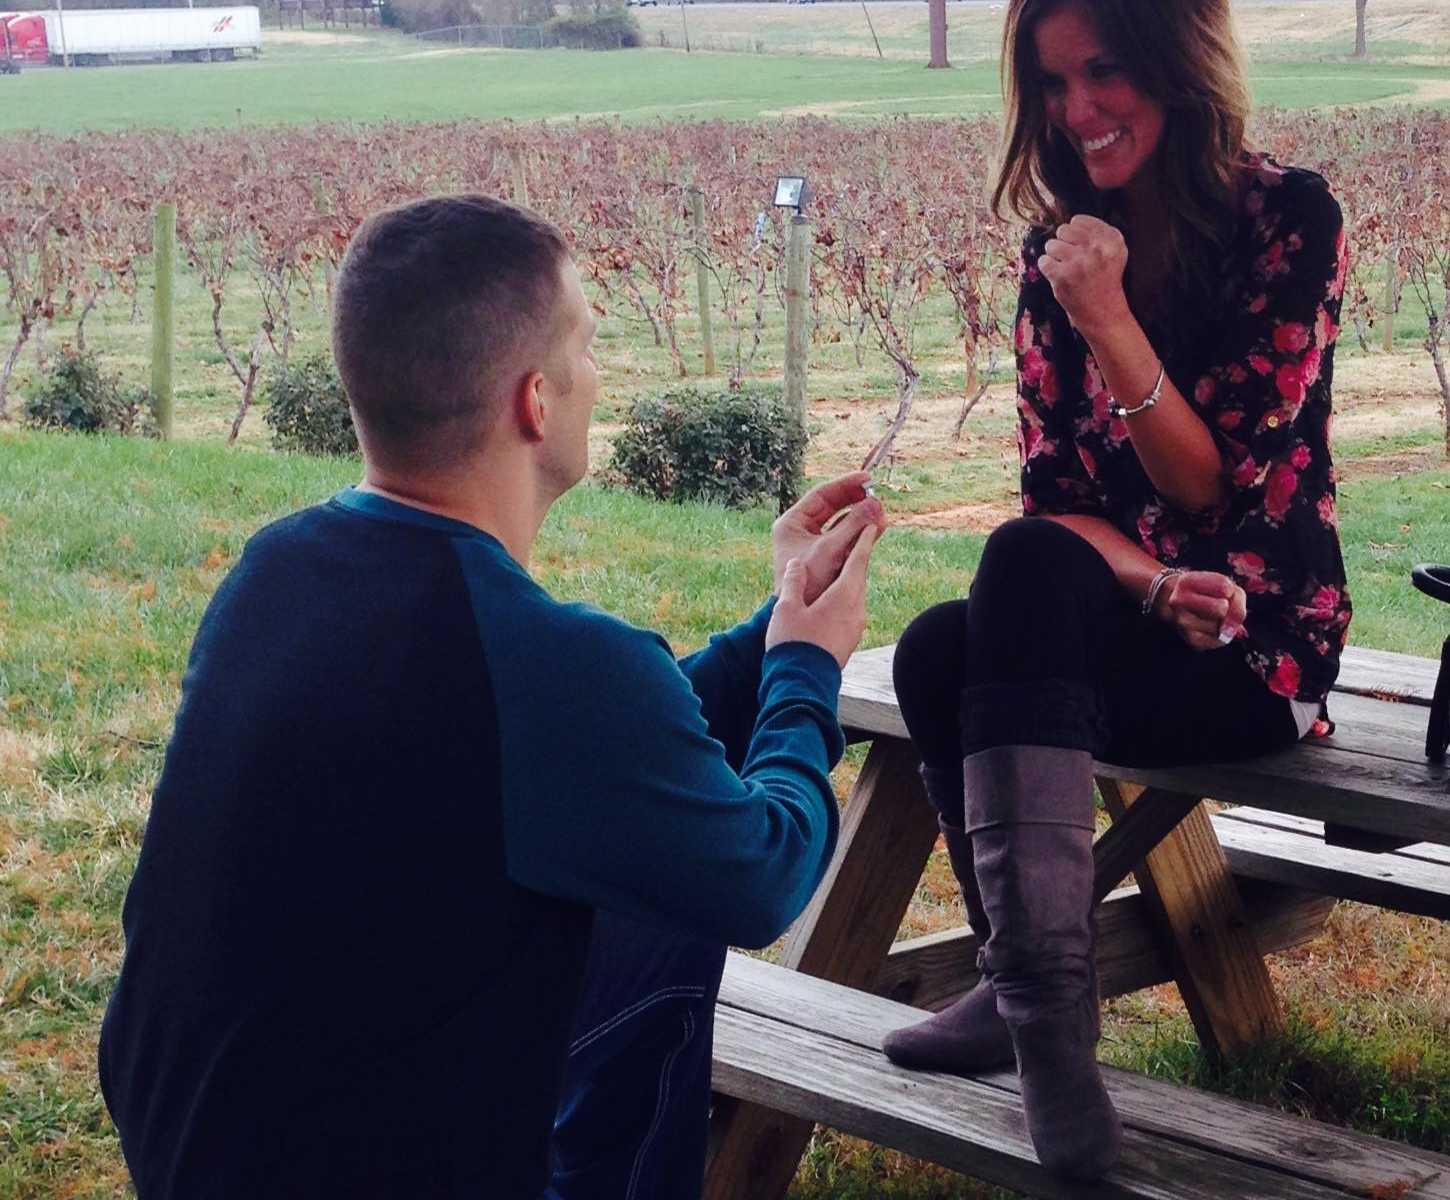 soldier proposes to girlfriend who is sitting on picnic table